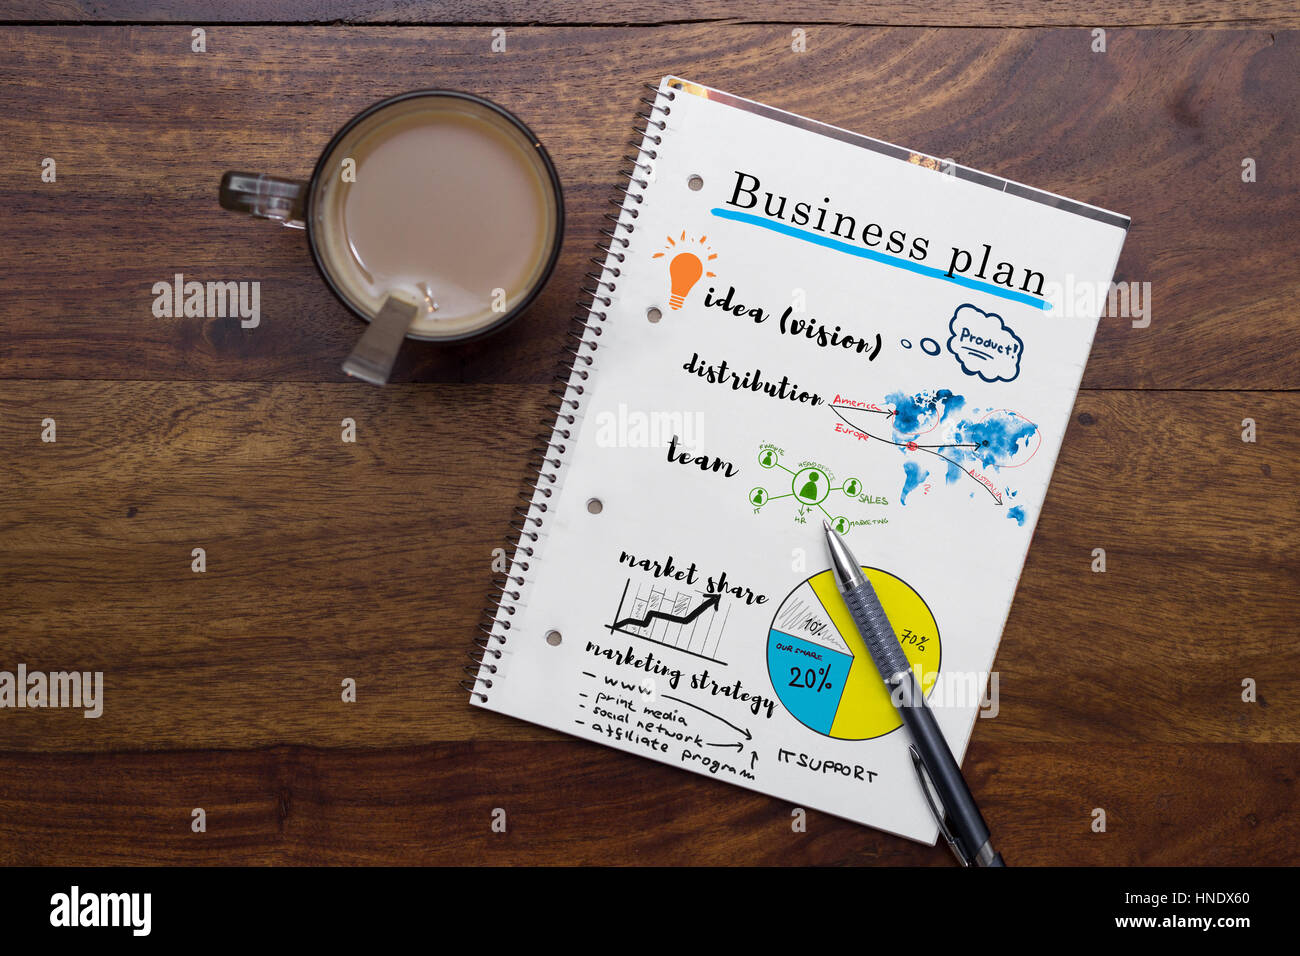 business plan notes on table Stock Photo